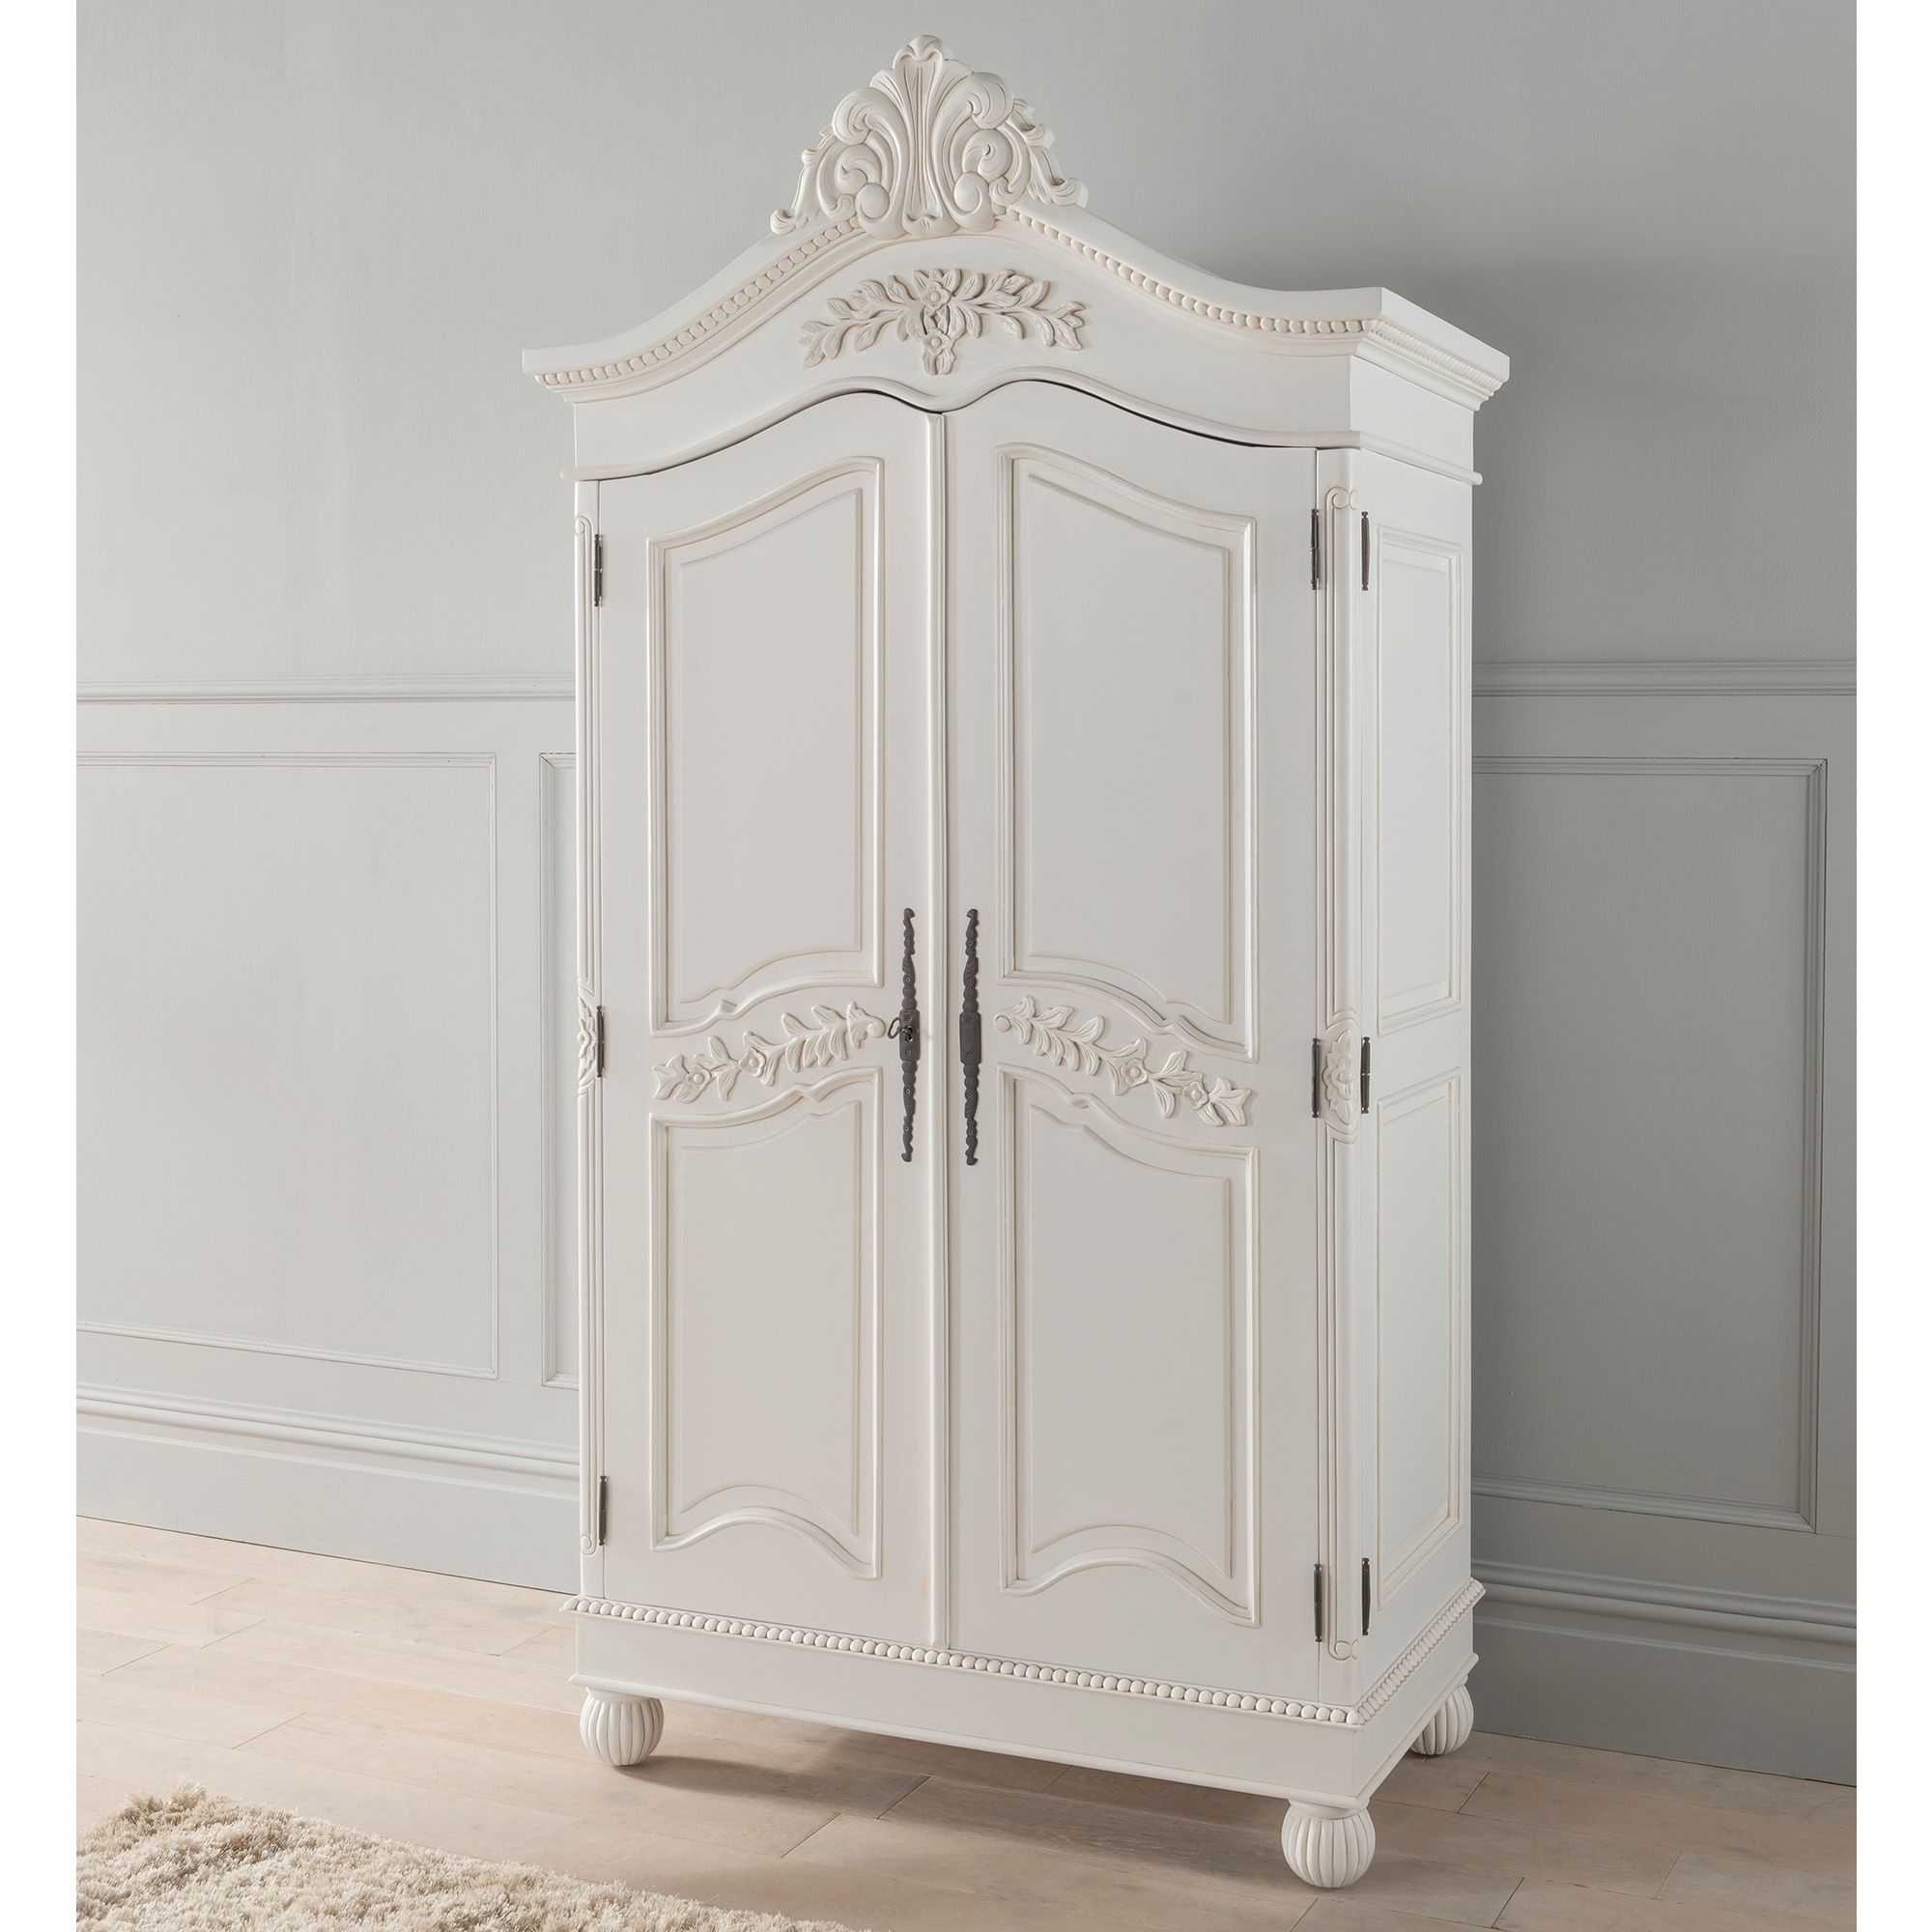 Antique French Style Wardrobe | Shabby Chic Bedroom Furniture Throughout Shabby Chic Wardrobes For Sale (View 6 of 15)